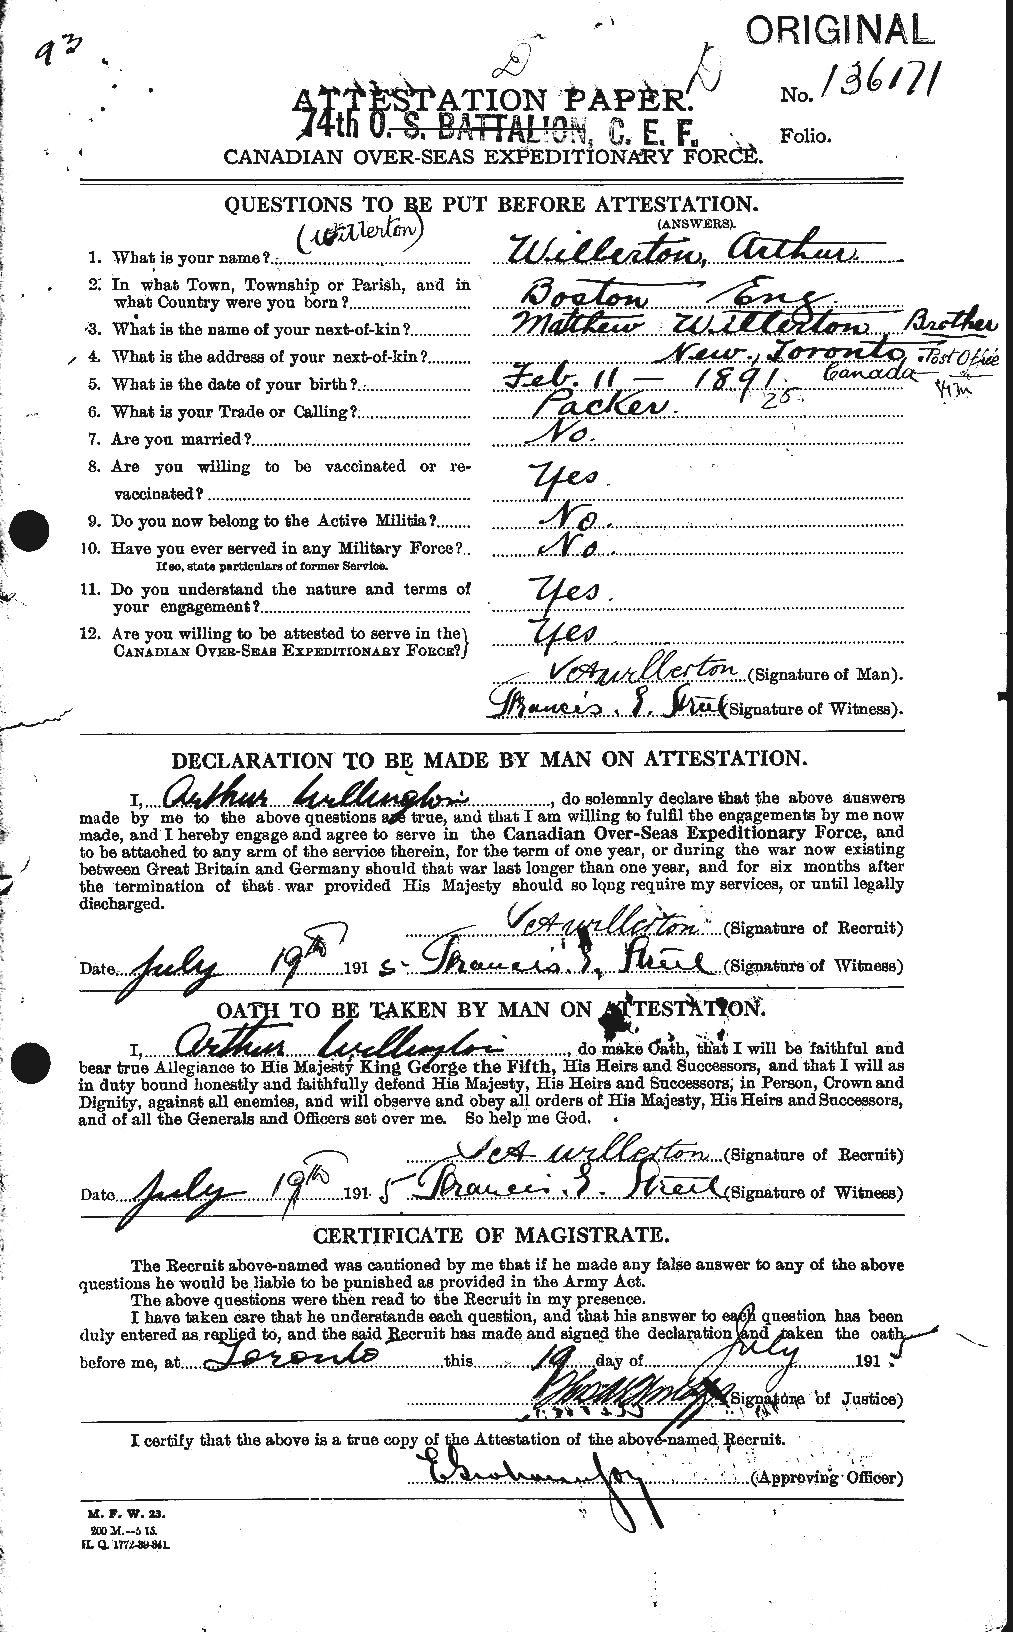 Personnel Records of the First World War - CEF 675260a